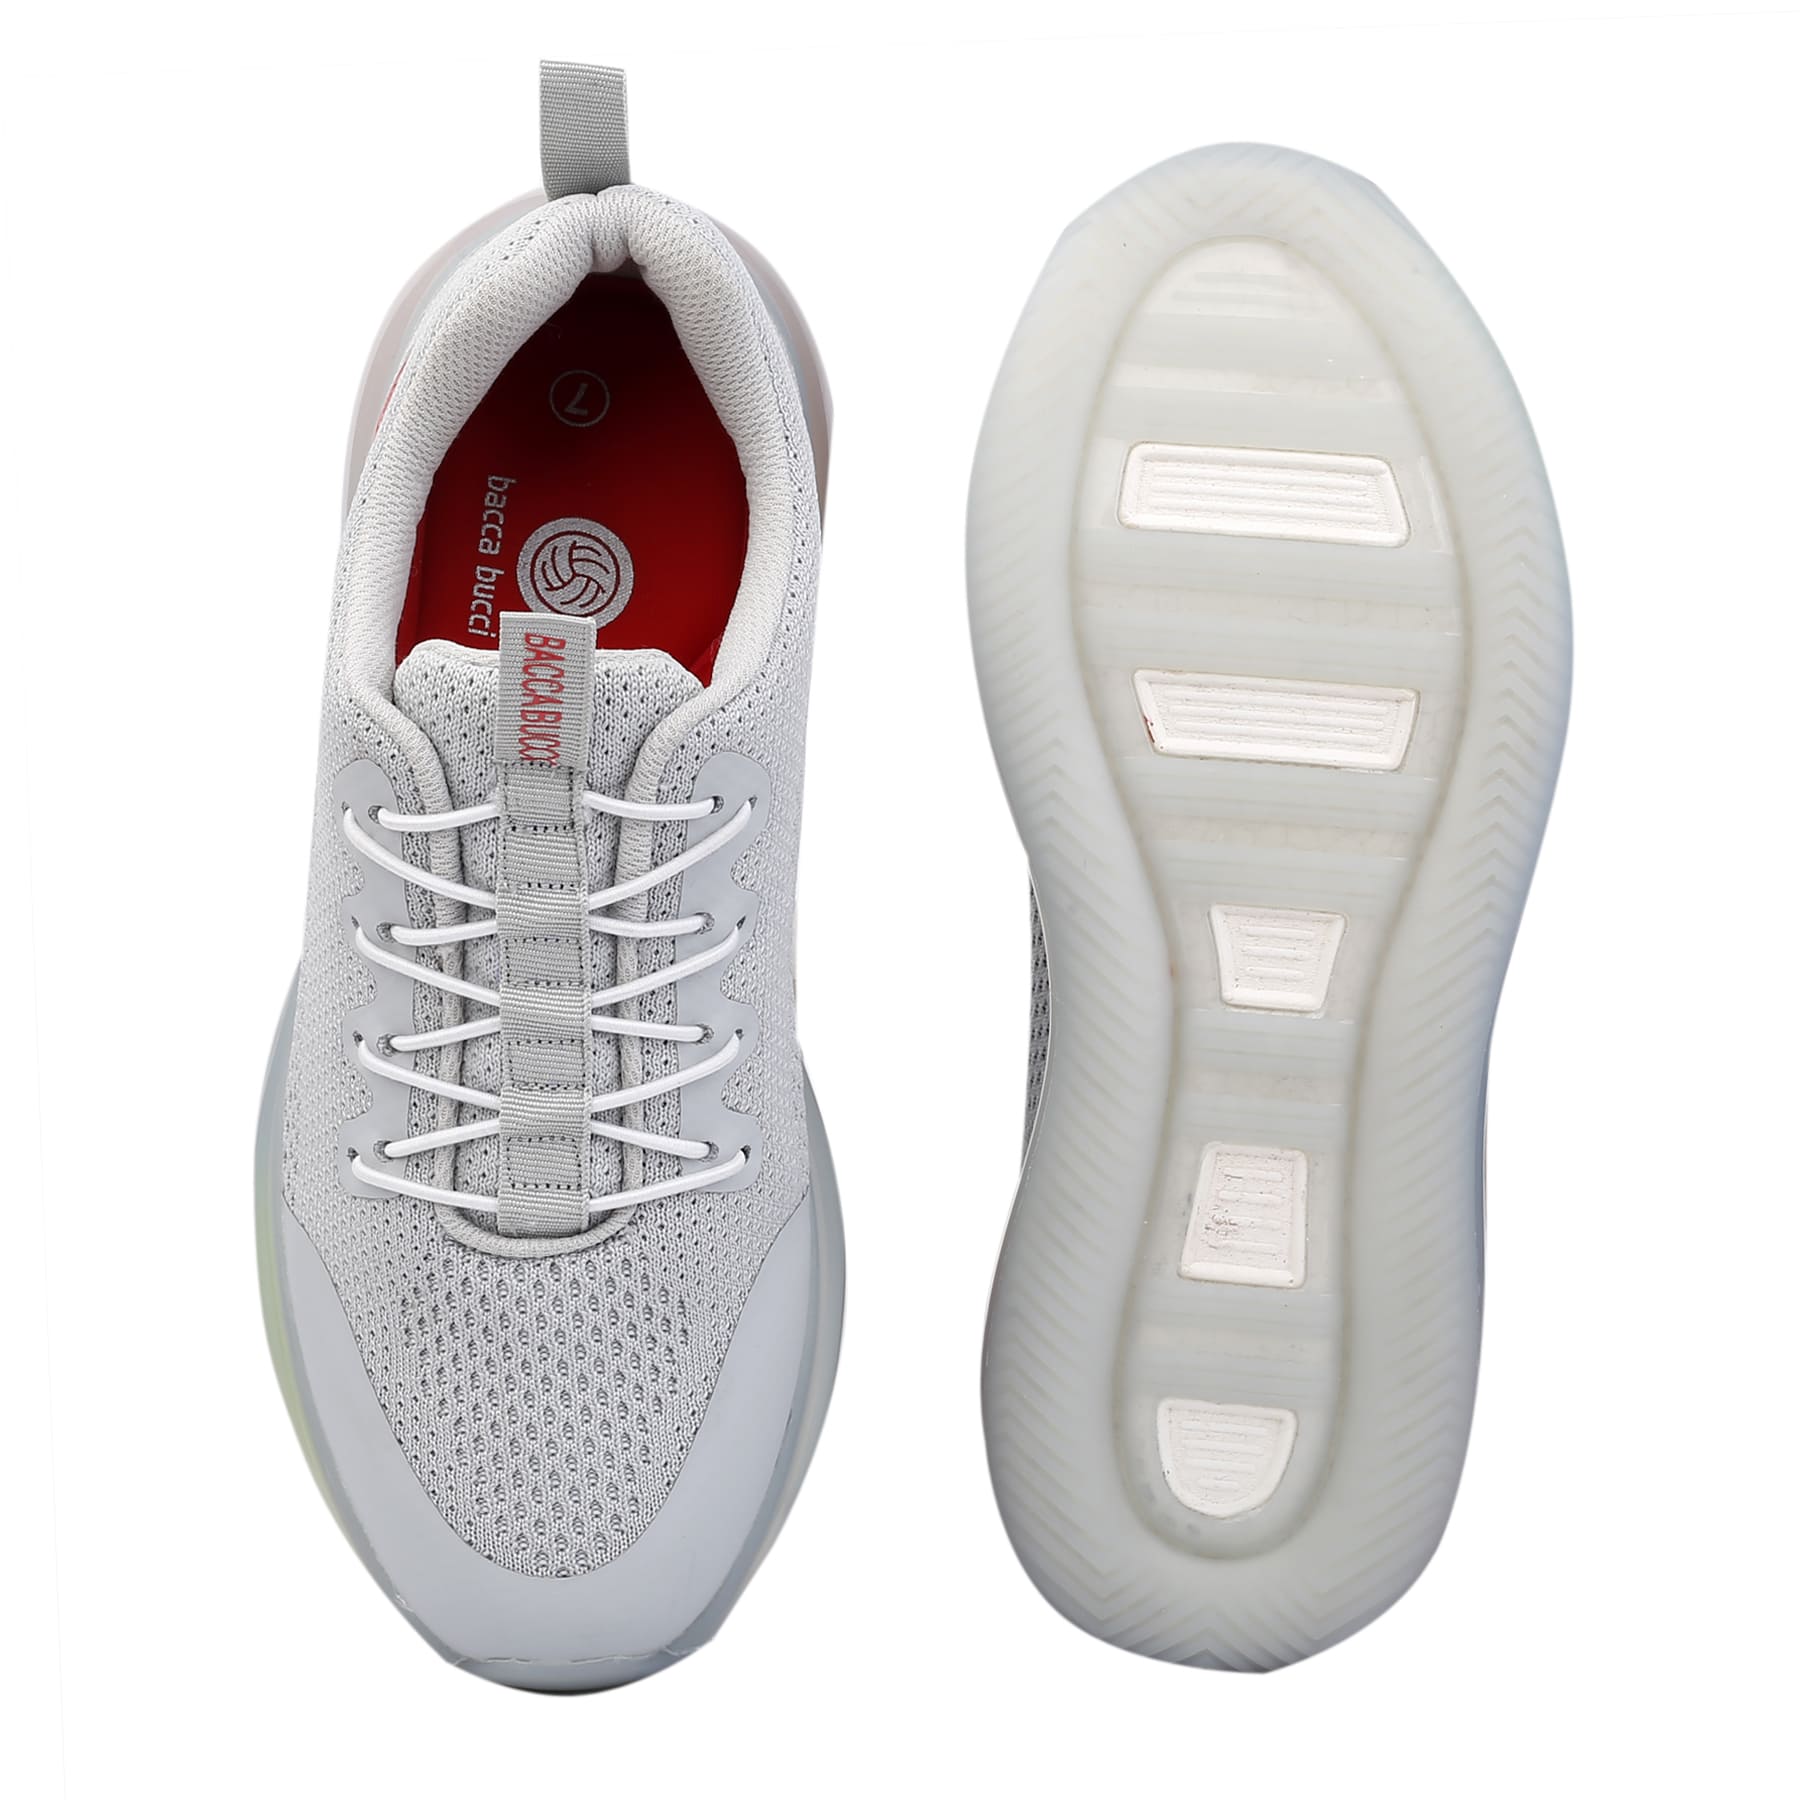 Men Elevator Sneakers Sports Shoes Invisible Height Increasing 2.36 Inches  Taller Elevator Shoes Lace up Fashion Sneakers - Walmart.com